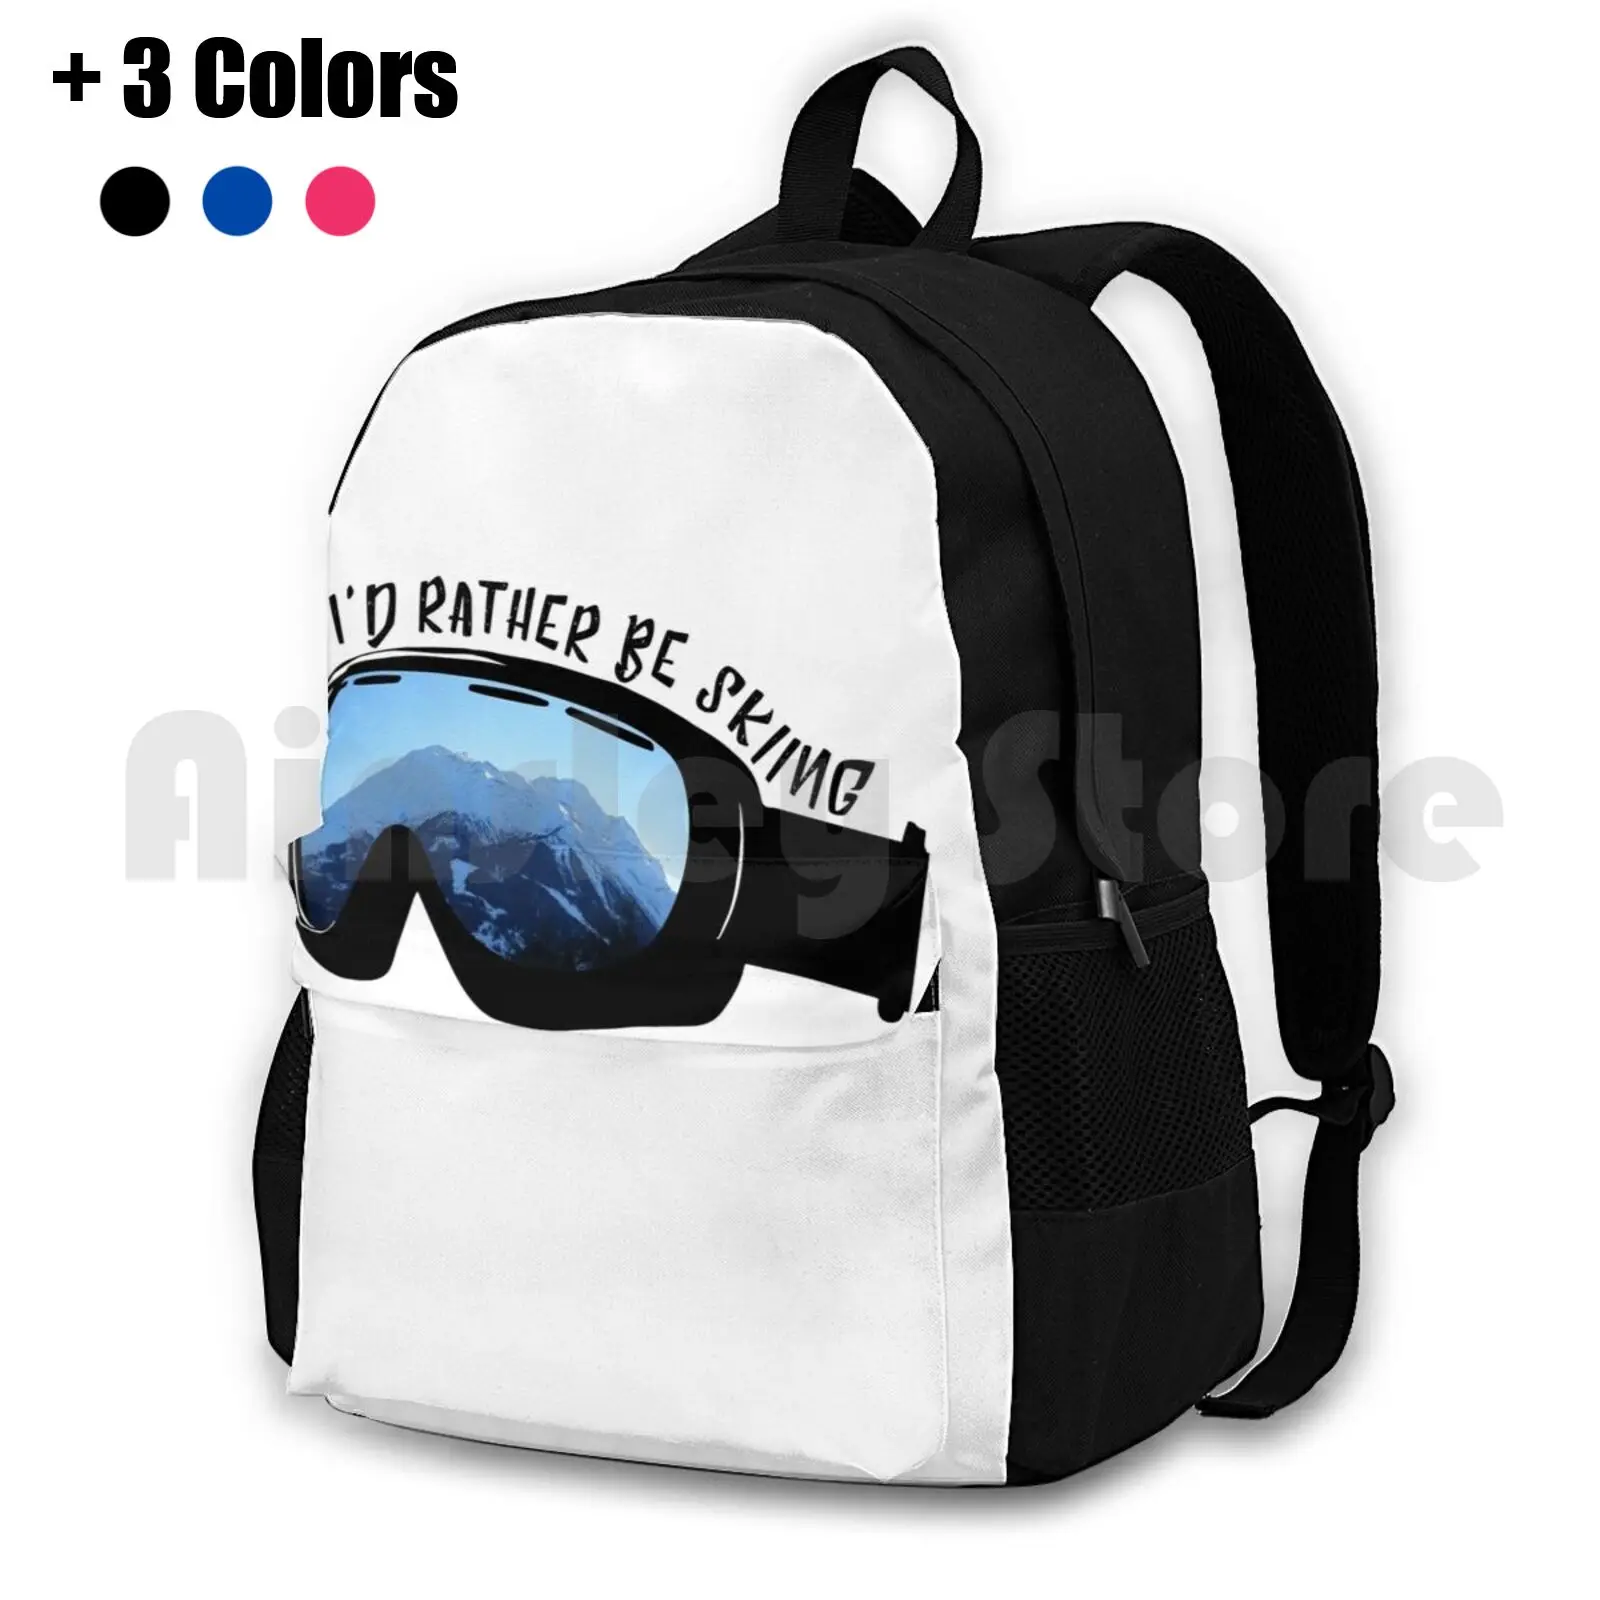 

I'D Rather Be Skiing-Goggles Outdoor Hiking Backpack Waterproof Camping Travel Id Rather Be Skiing Ski Mountain Swiss Alps